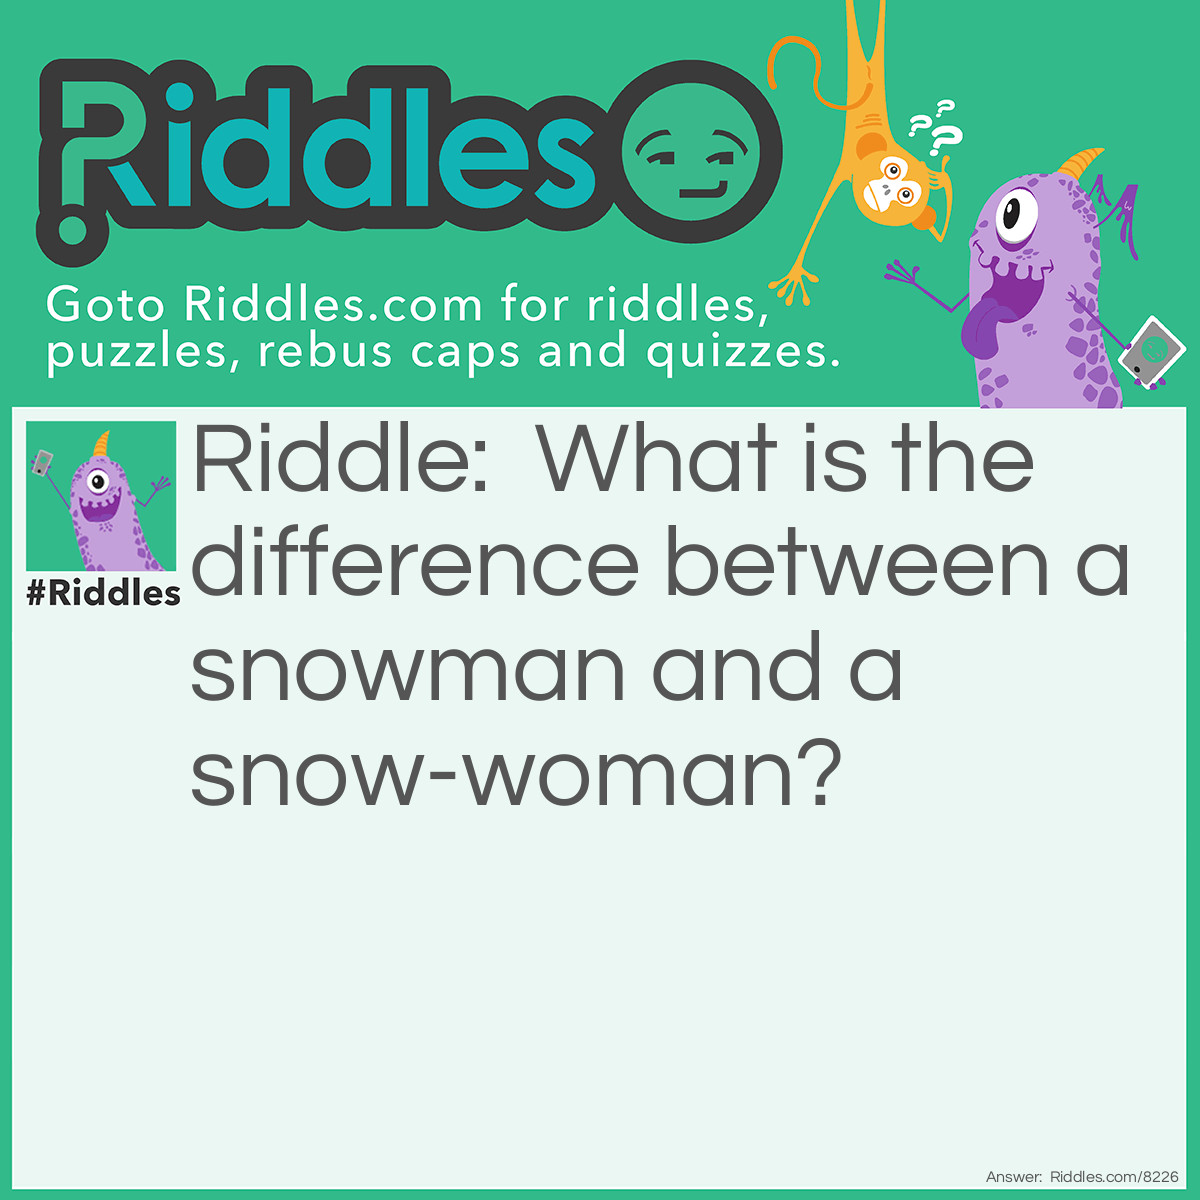 Riddle: What is the difference between a snowman and a snow-woman? Answer: Snowballs.